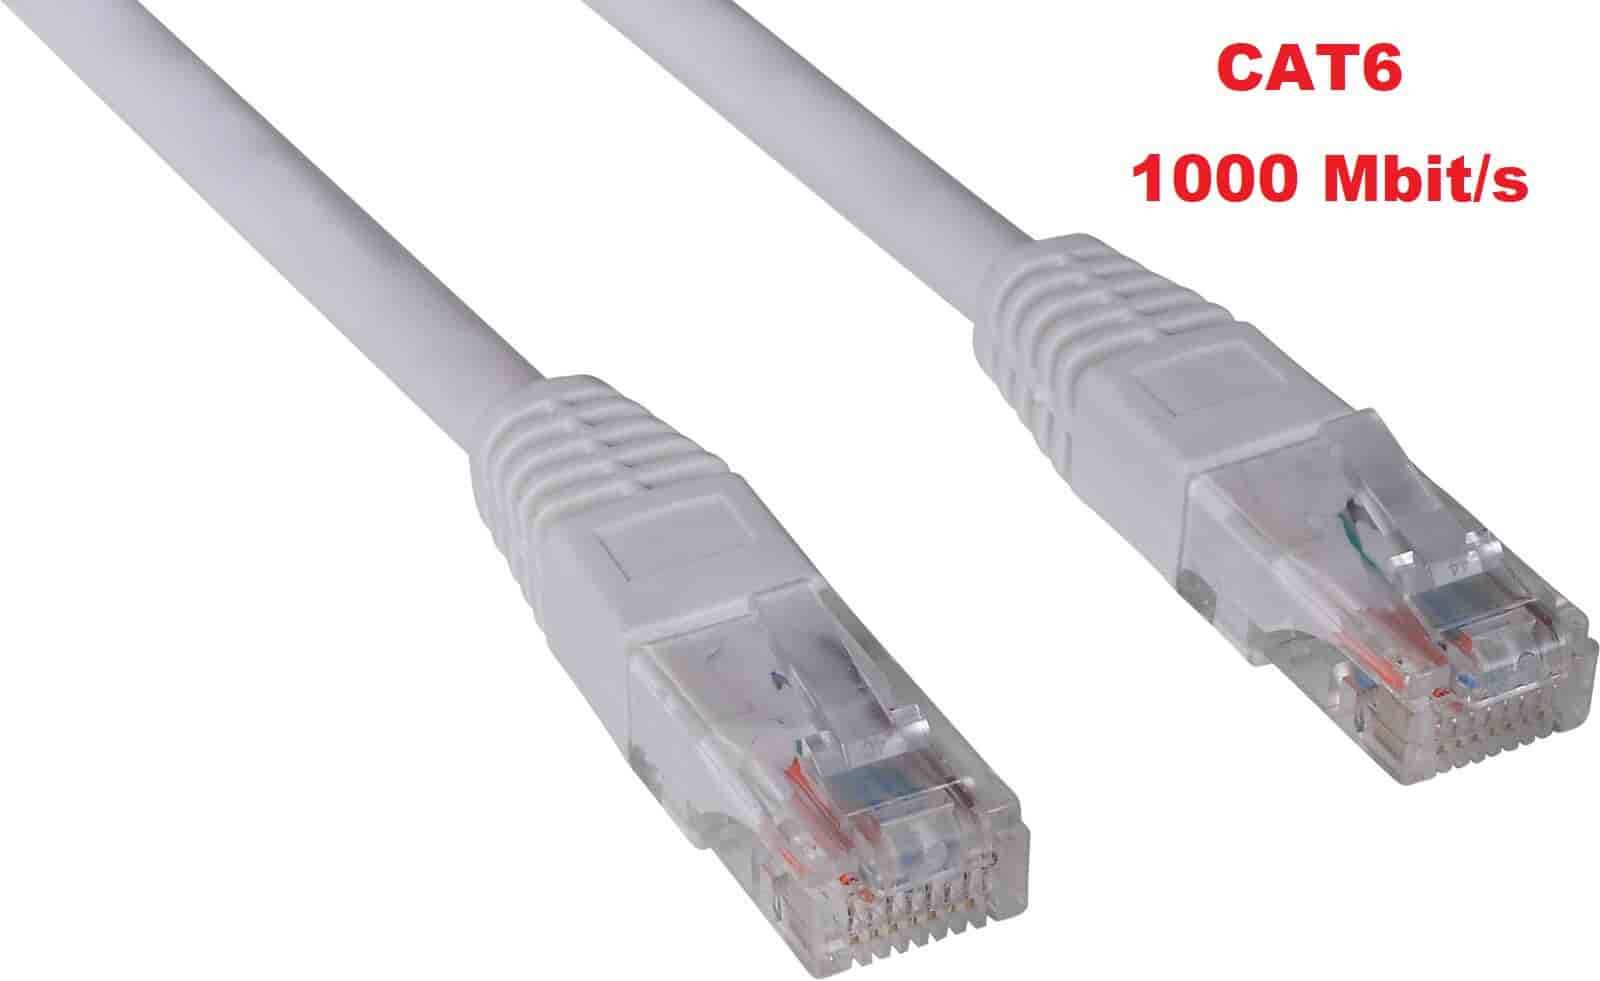 CAT6 UTP LAN patchcable 10 meter.